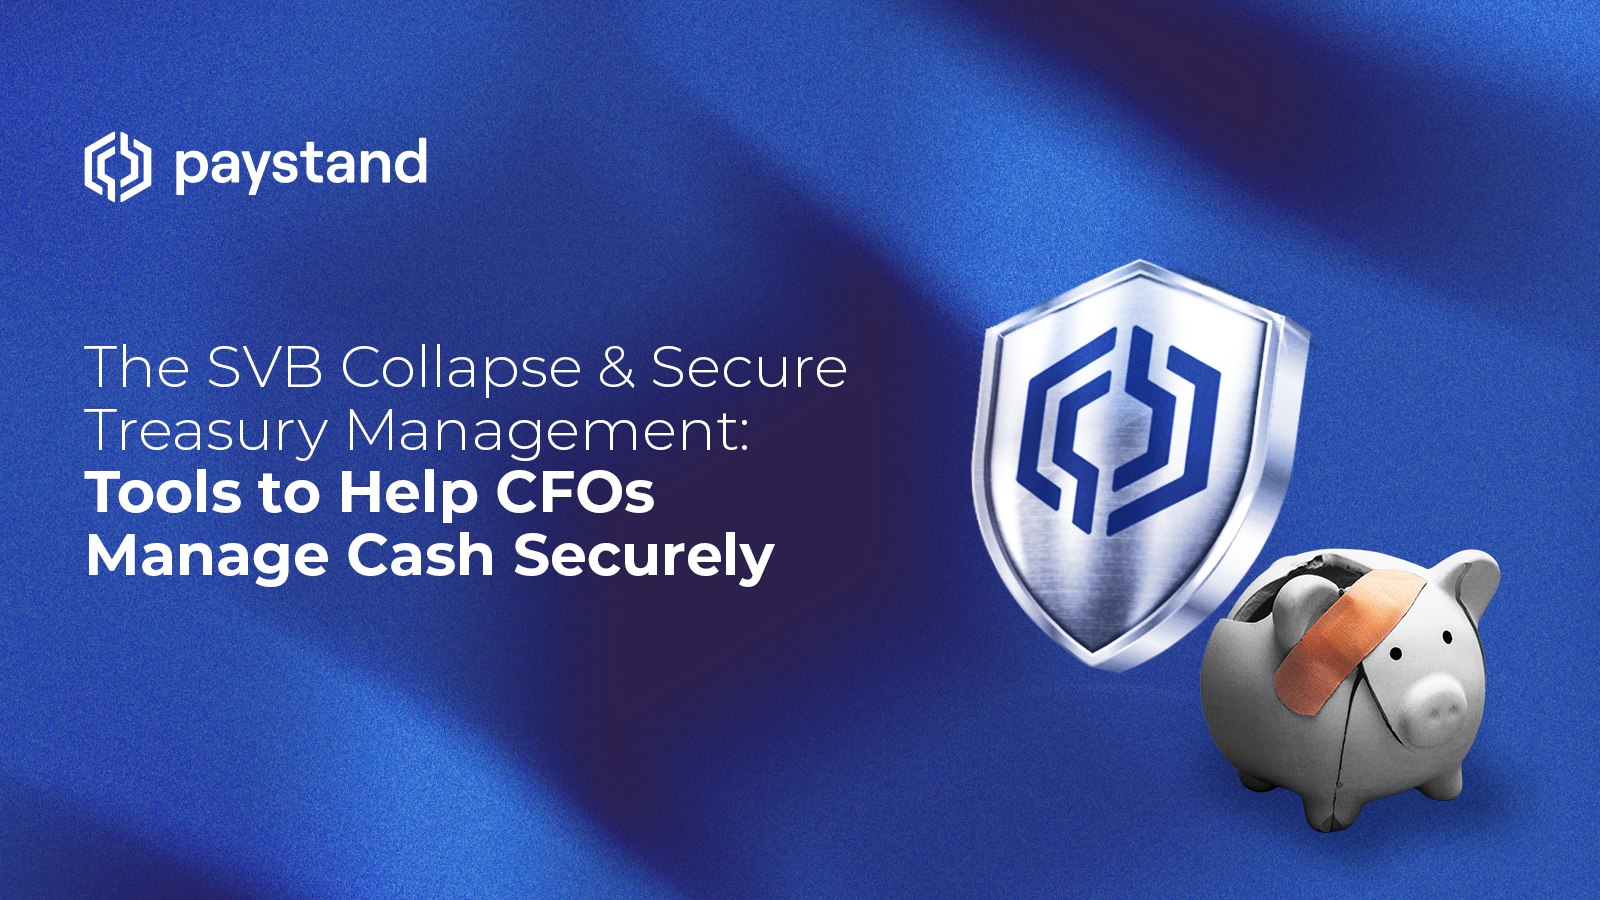 The SVB Collapse & Secure Treasury Management: Tools to Manage Cash Securely